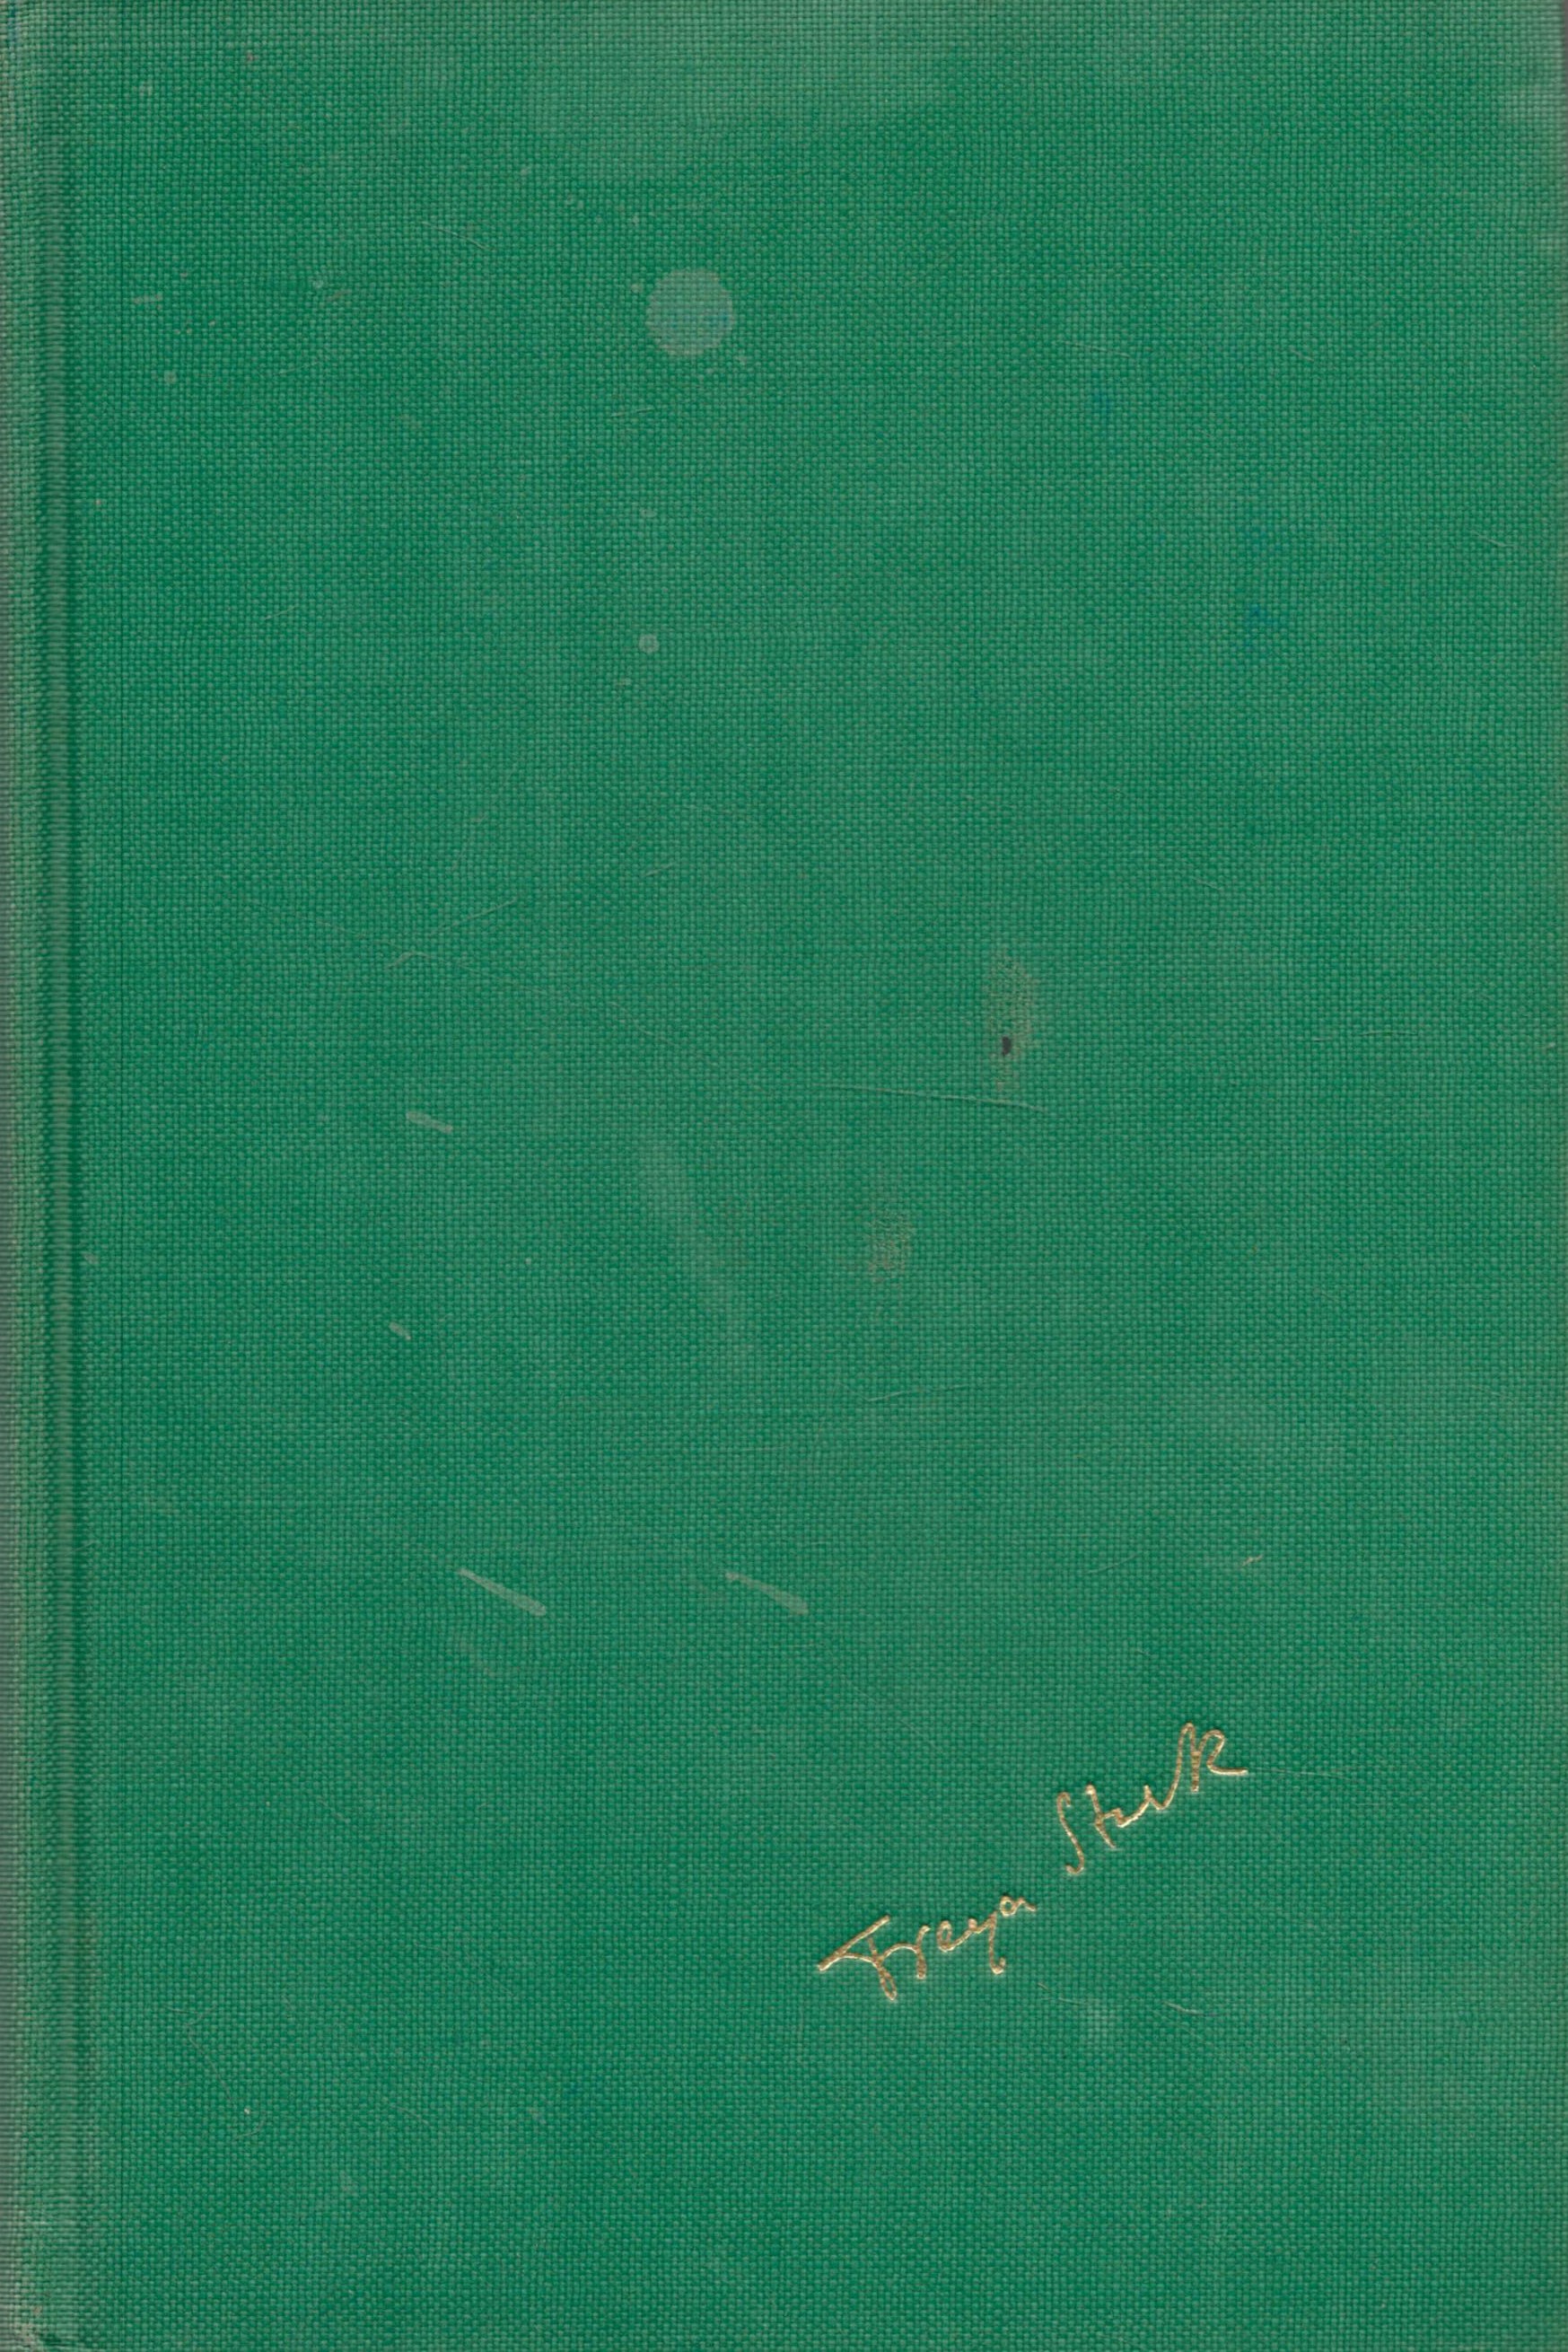 Freya Stark The Coast of Incense. Autobiography 1933-1939. Published by John Murray. London. 1953.